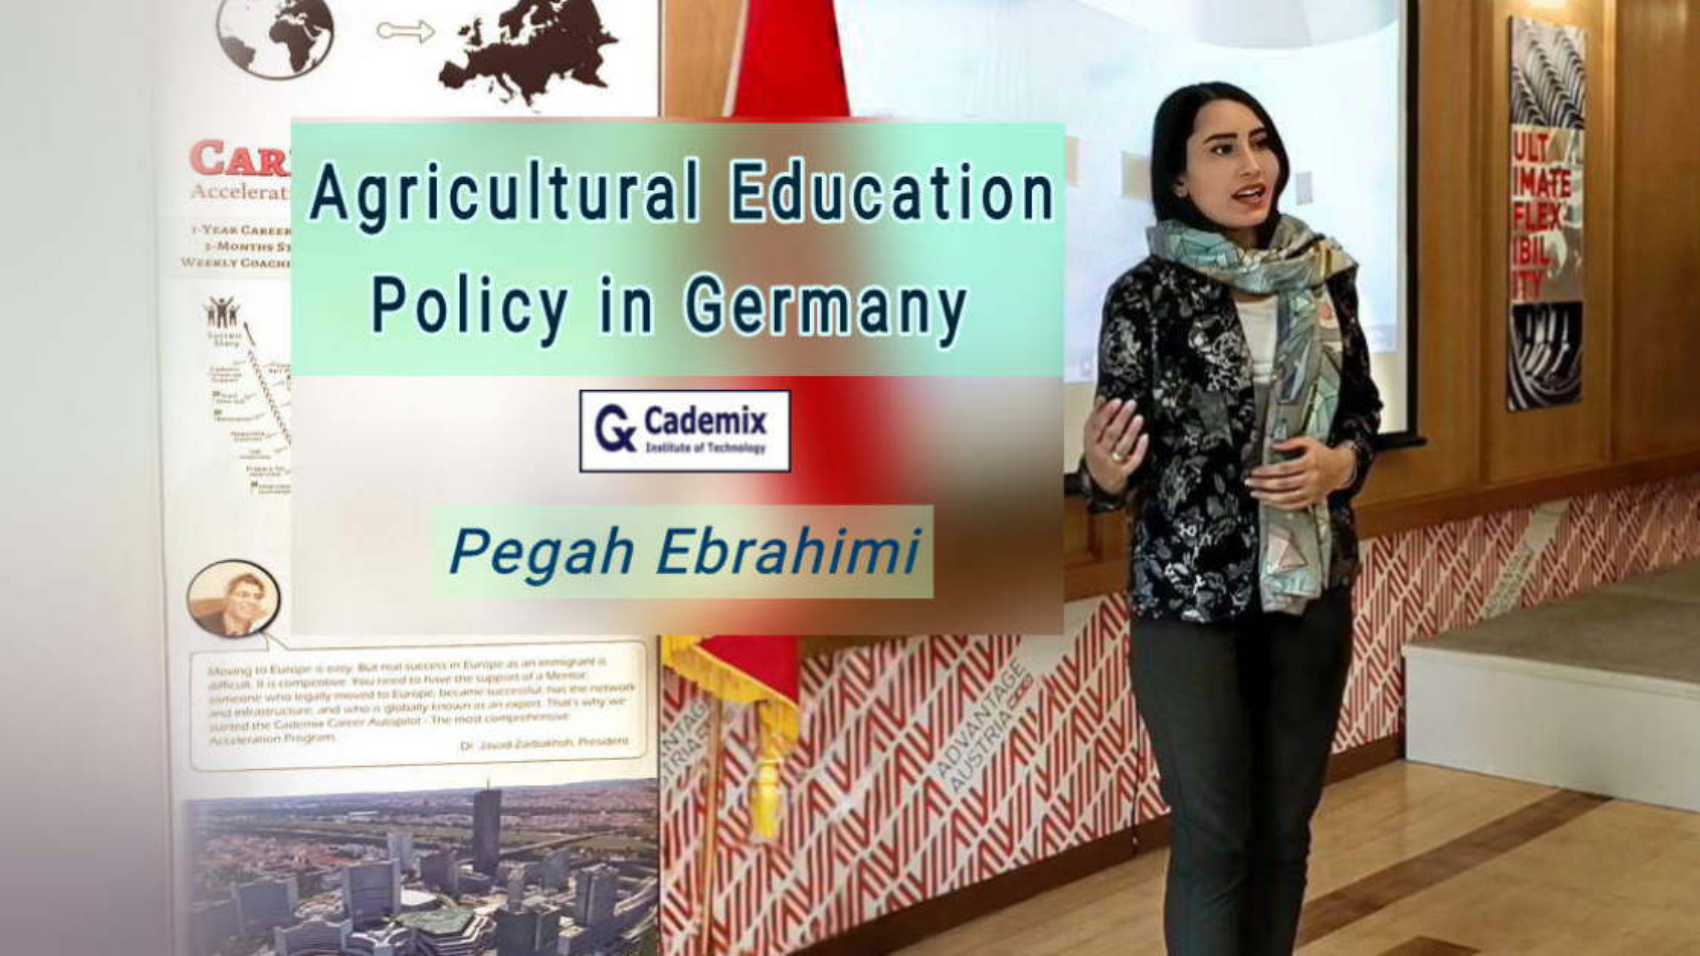 International conference on Agriculture Pegah Ebrahimi Cademix Article